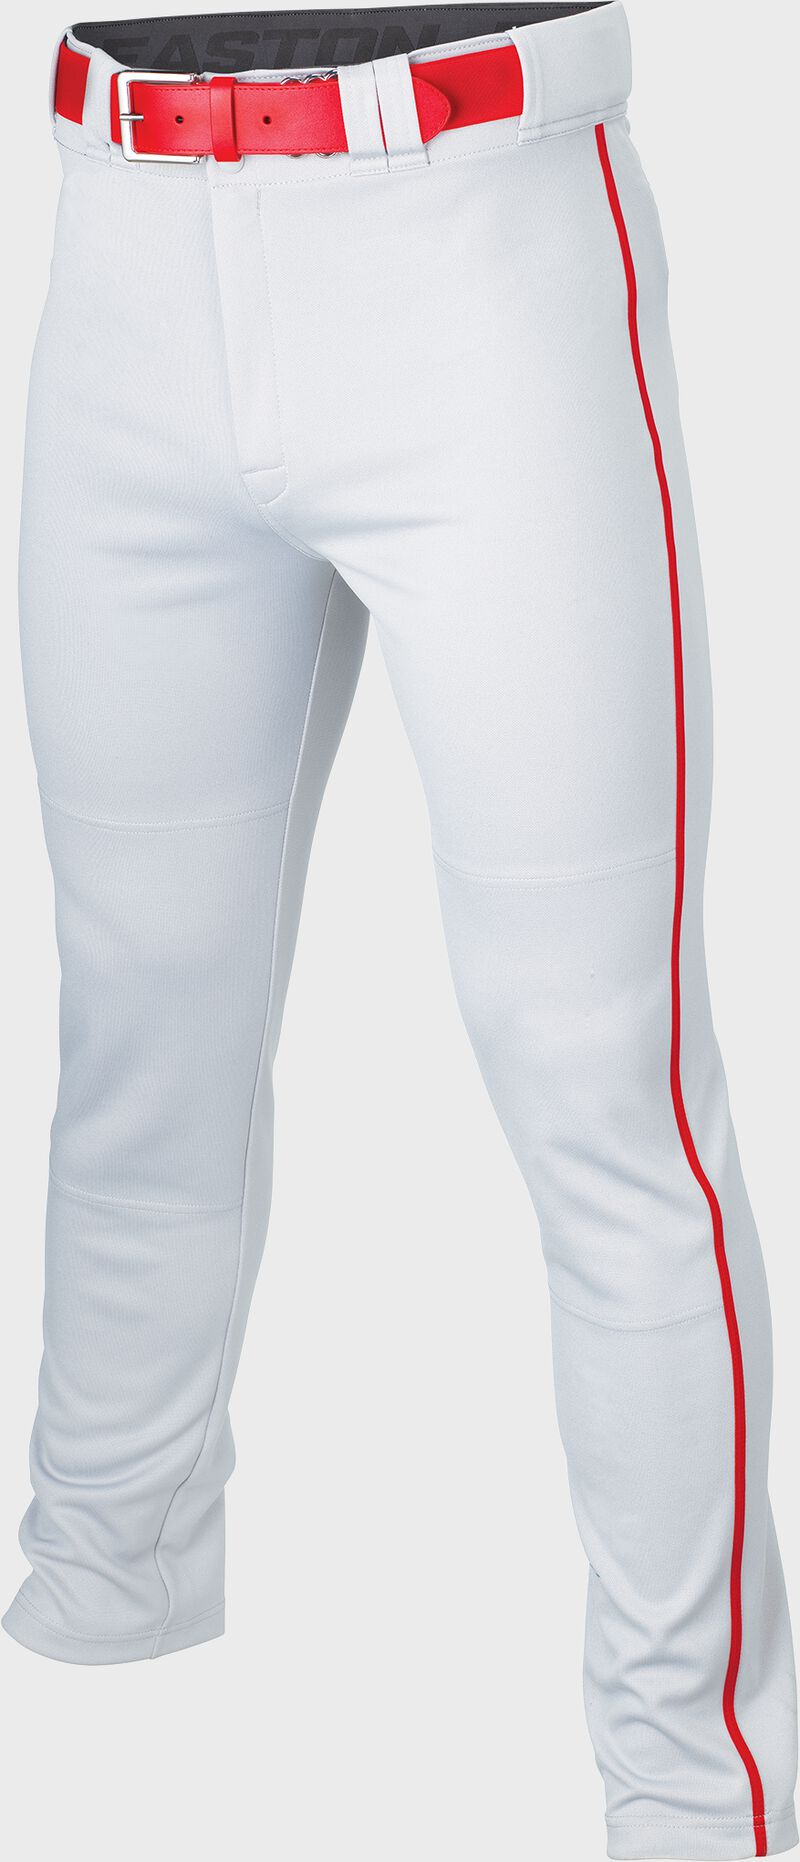 Rival+ Pant Youth Piped WHITE/RED L